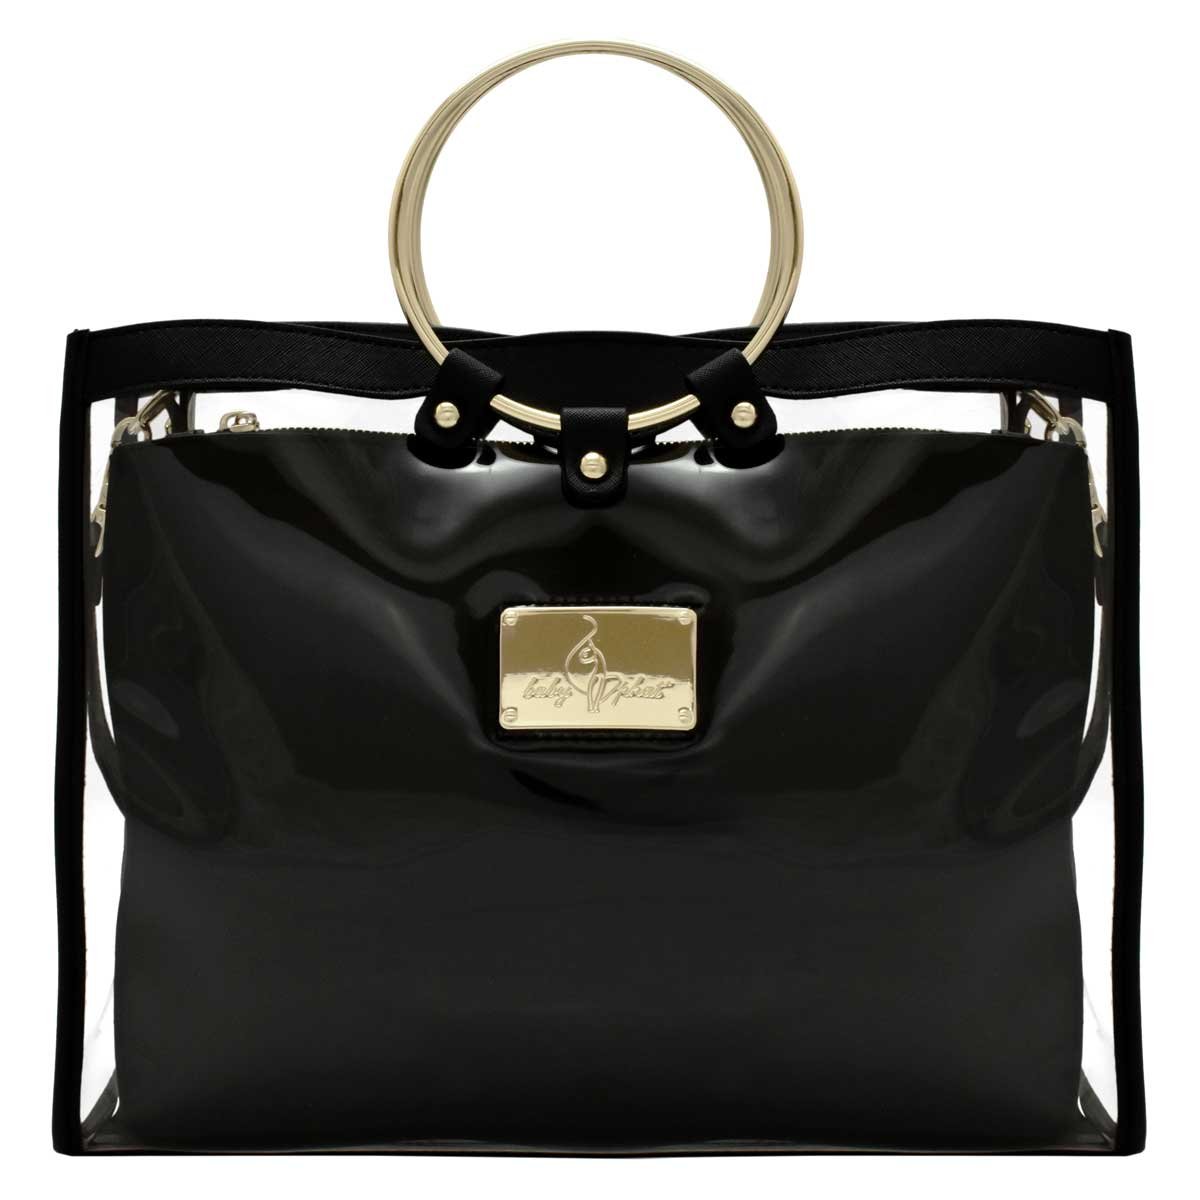 Bolso Tote Color Negro Baby Phat